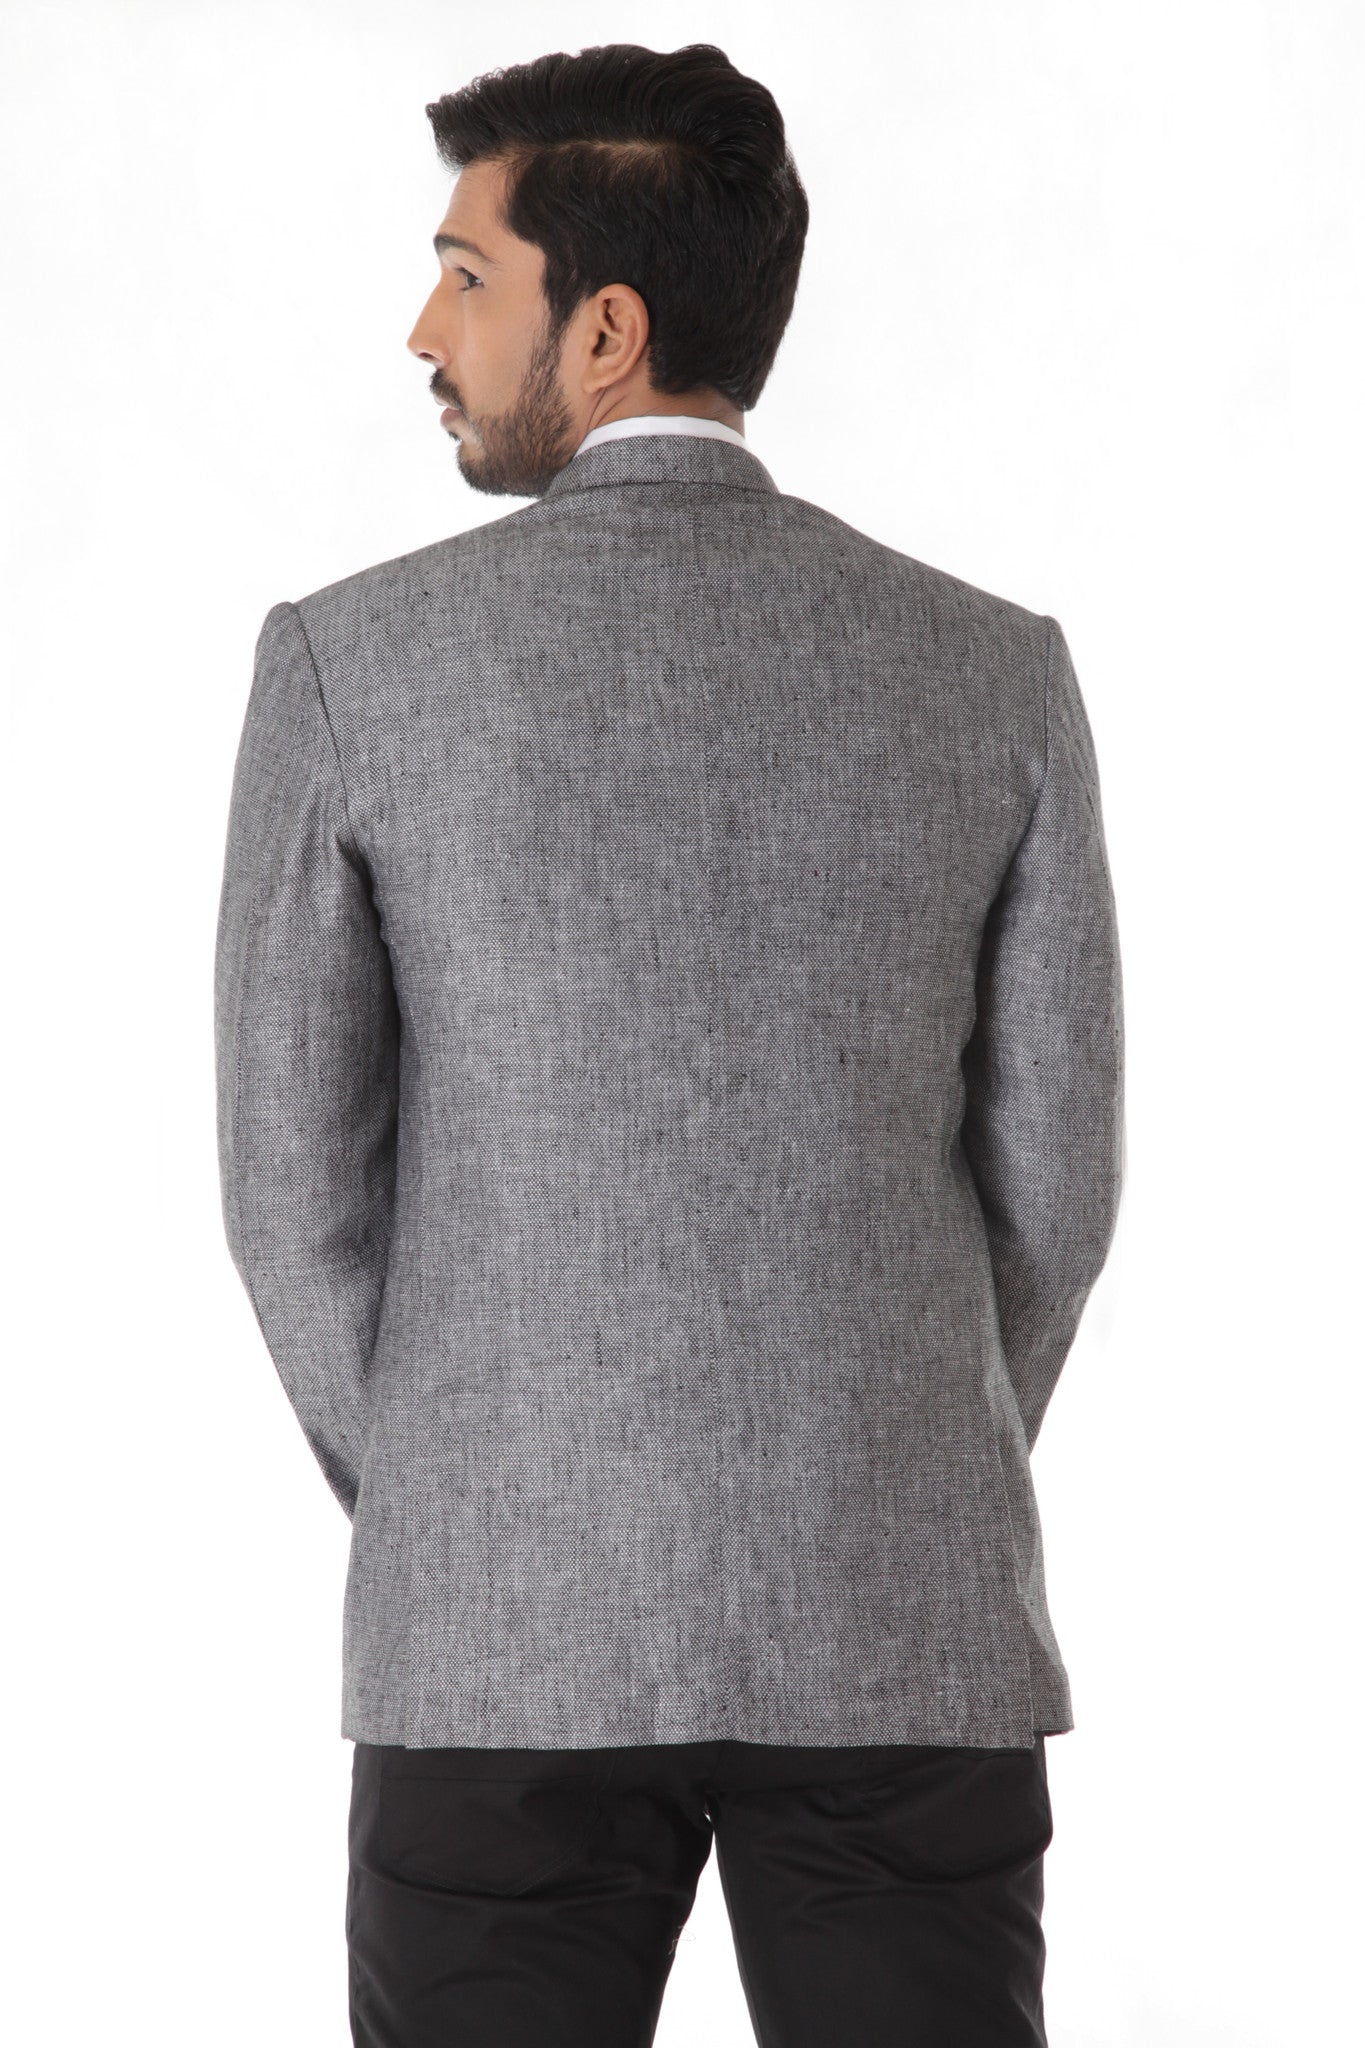 Grey Linen Bandhgala Jacket with Pocket Square – The Imperial India Company